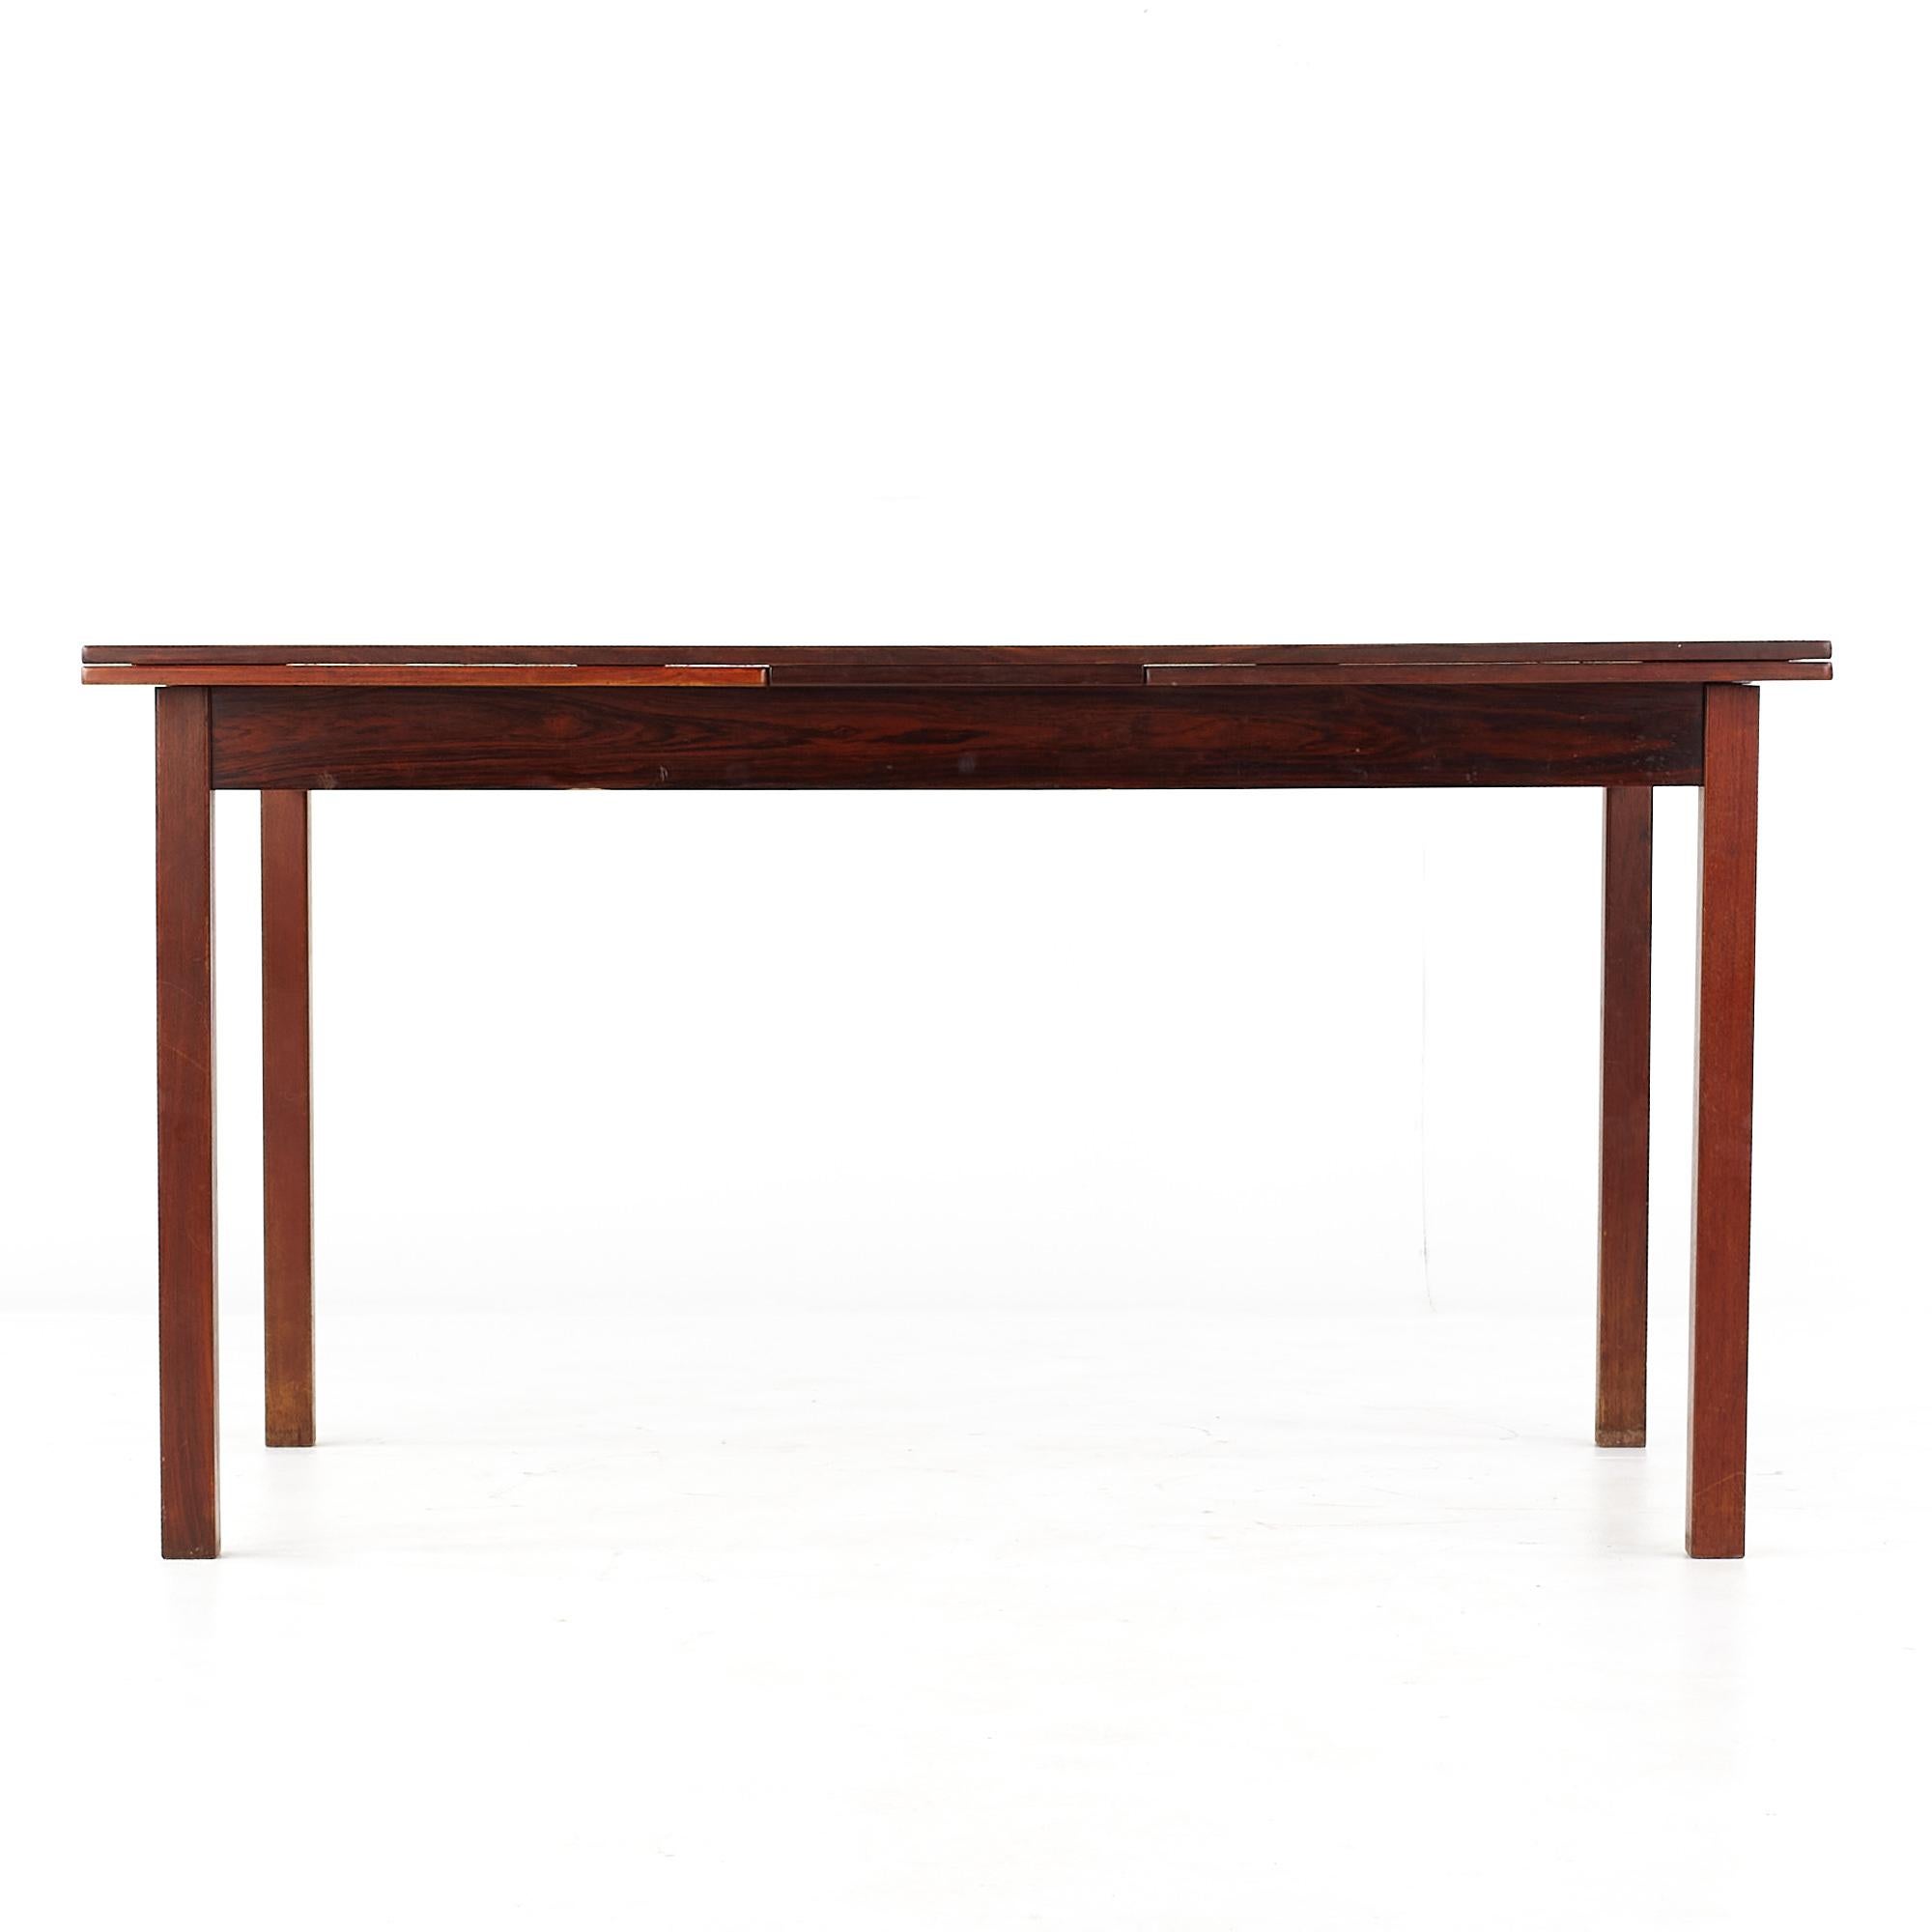 Niels Moller Style Mid Century Rosewood Hidden Leaf Dining Table

This table measures: 55 wide x 35.5 deep x 29 inches high, with a chair clearance of 24.5 inches

All pieces of furniture can be had in what we call restored vintage condition. That